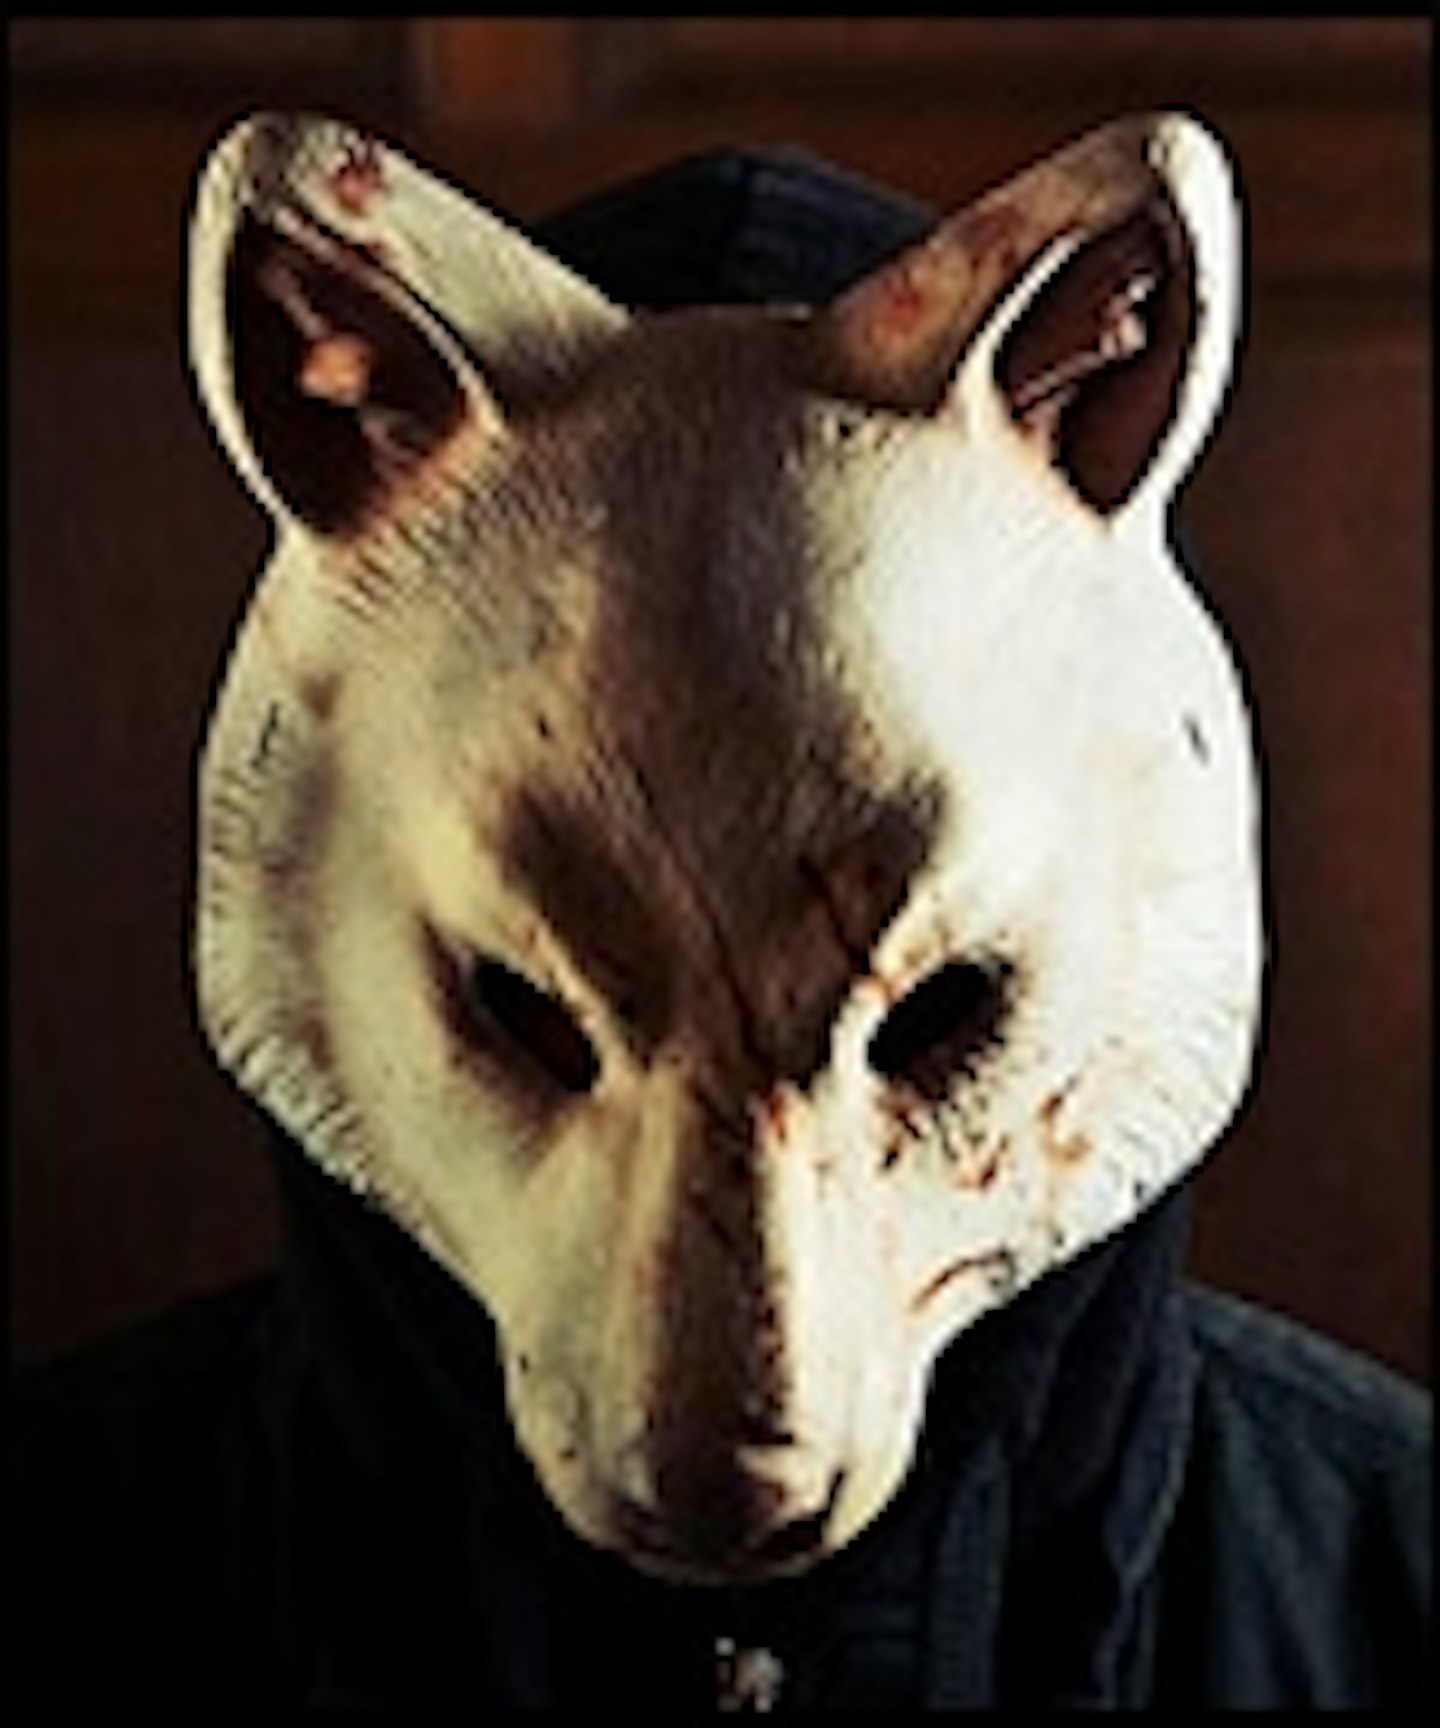 You're Next Trailer Online